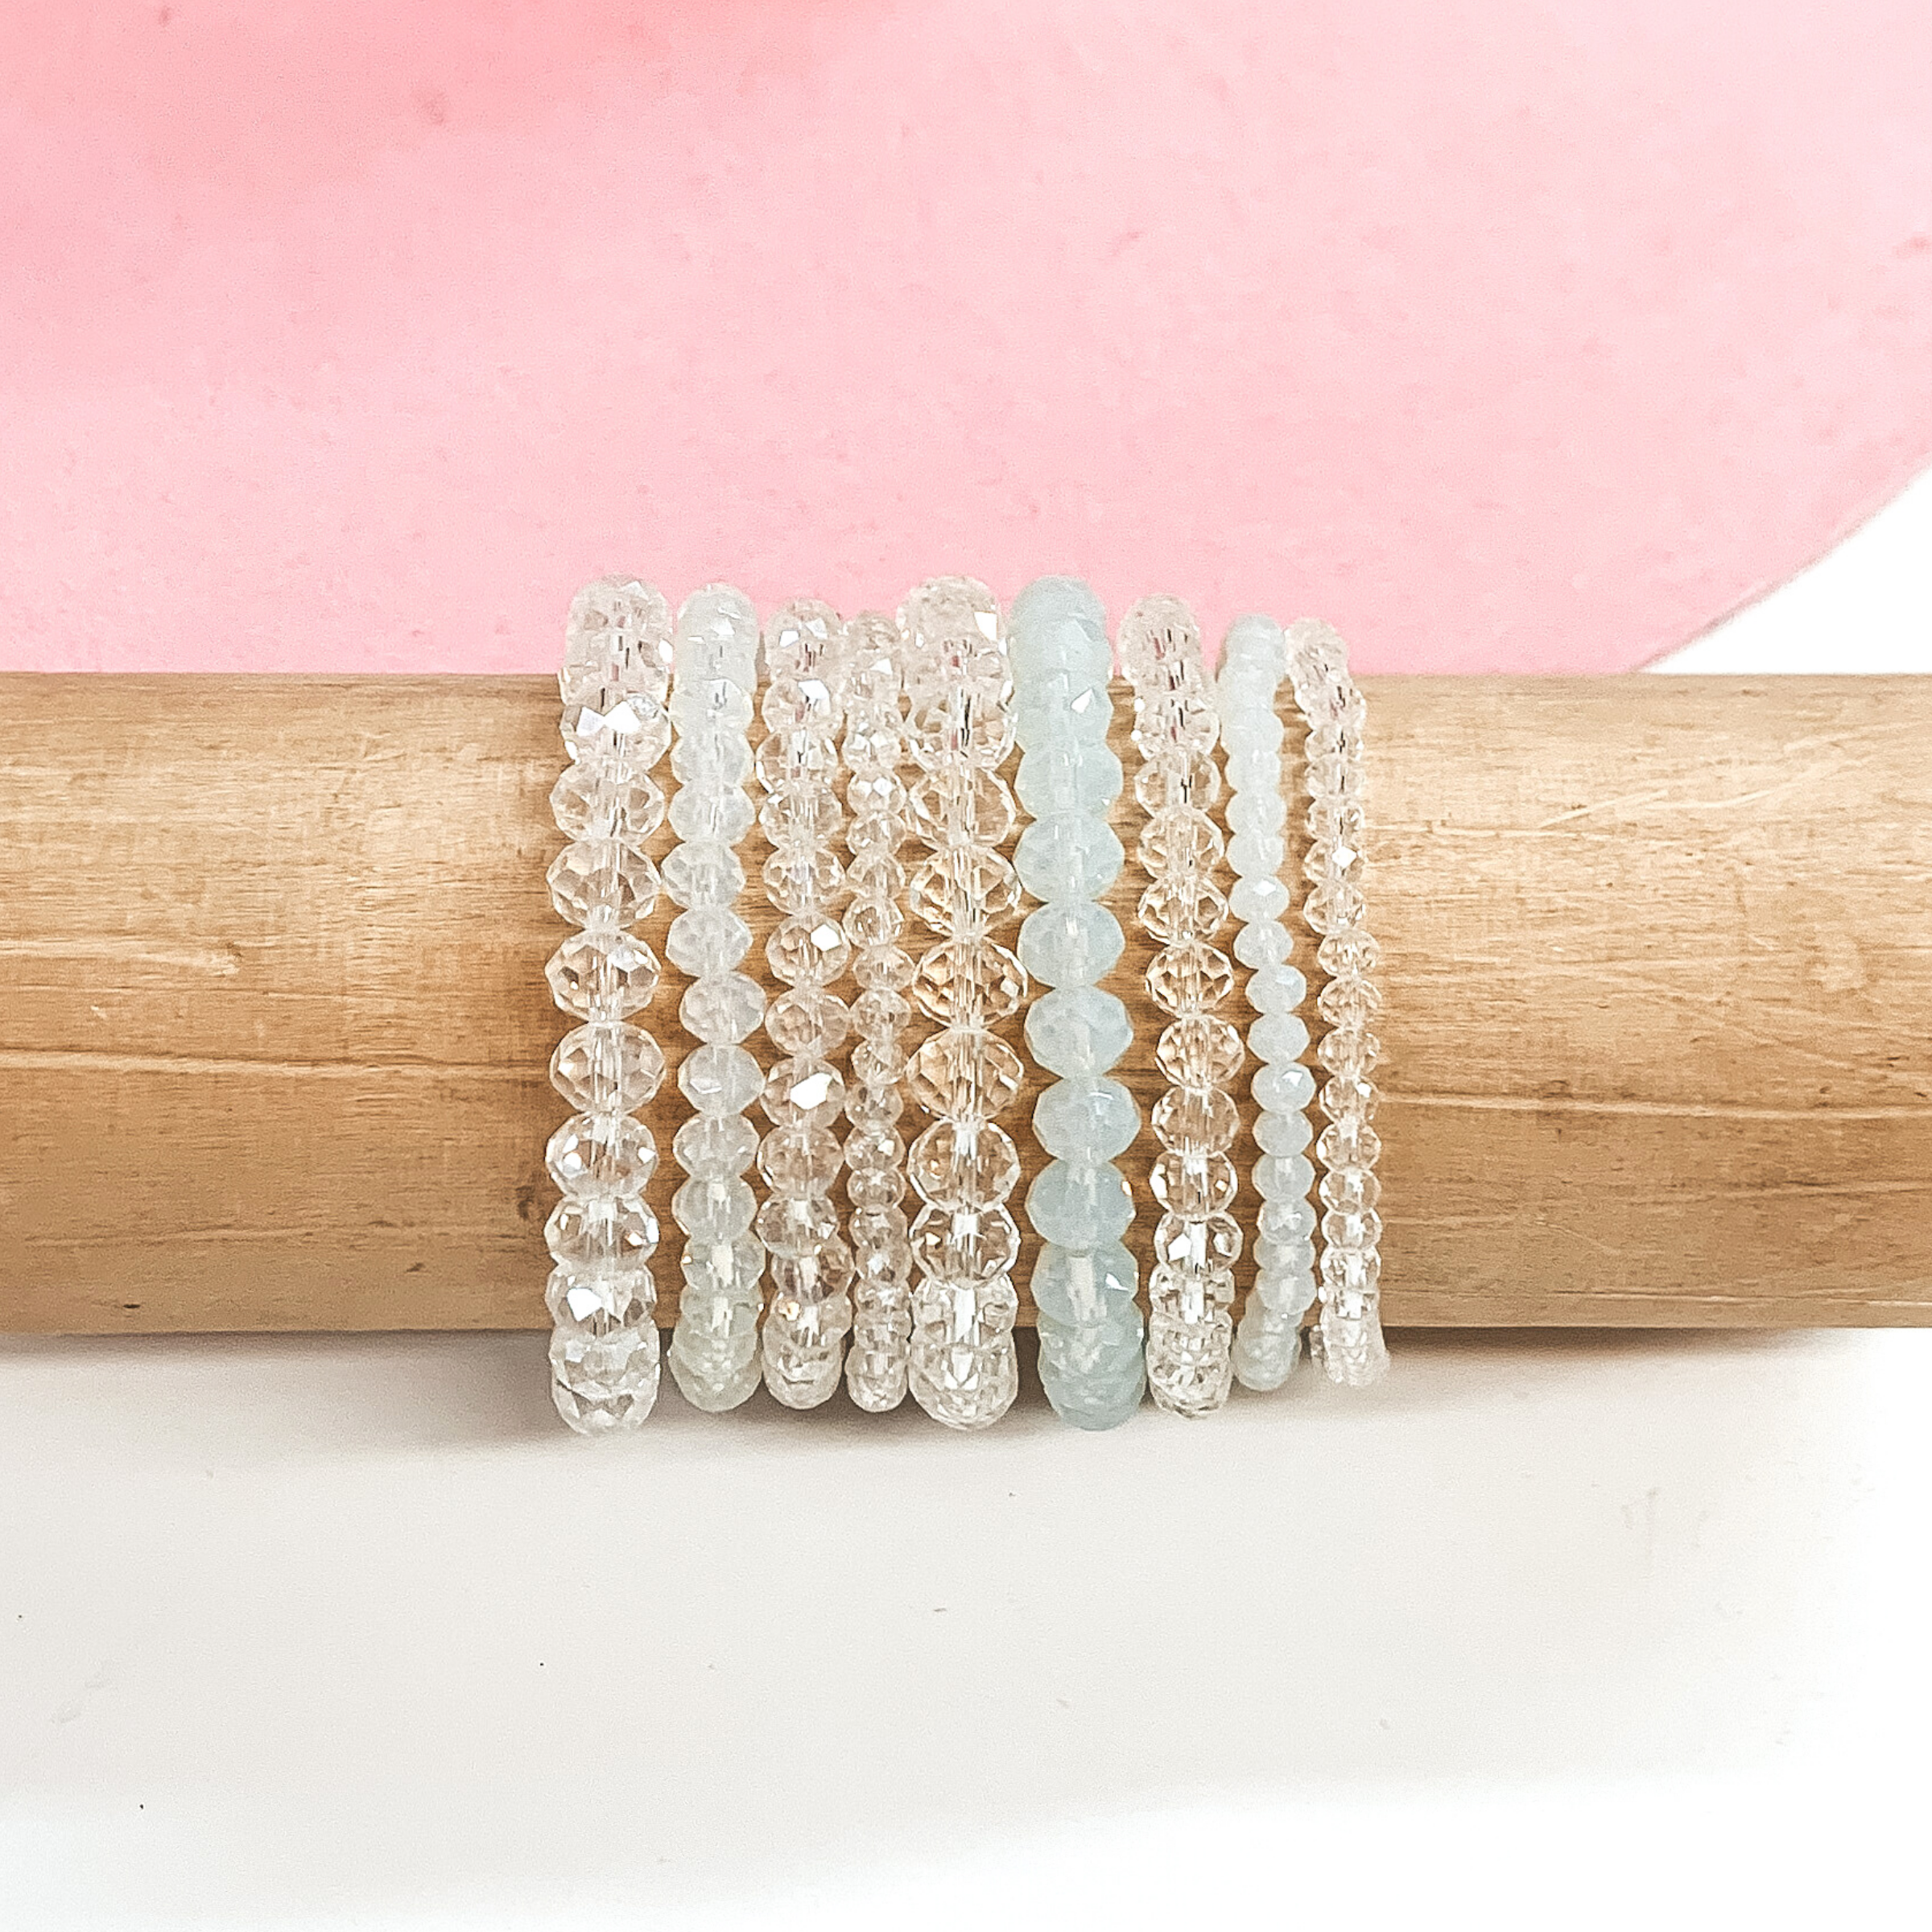 Nine Piece Crystal Beaded Bracelet Set in Clear - Giddy Up Glamour Boutique